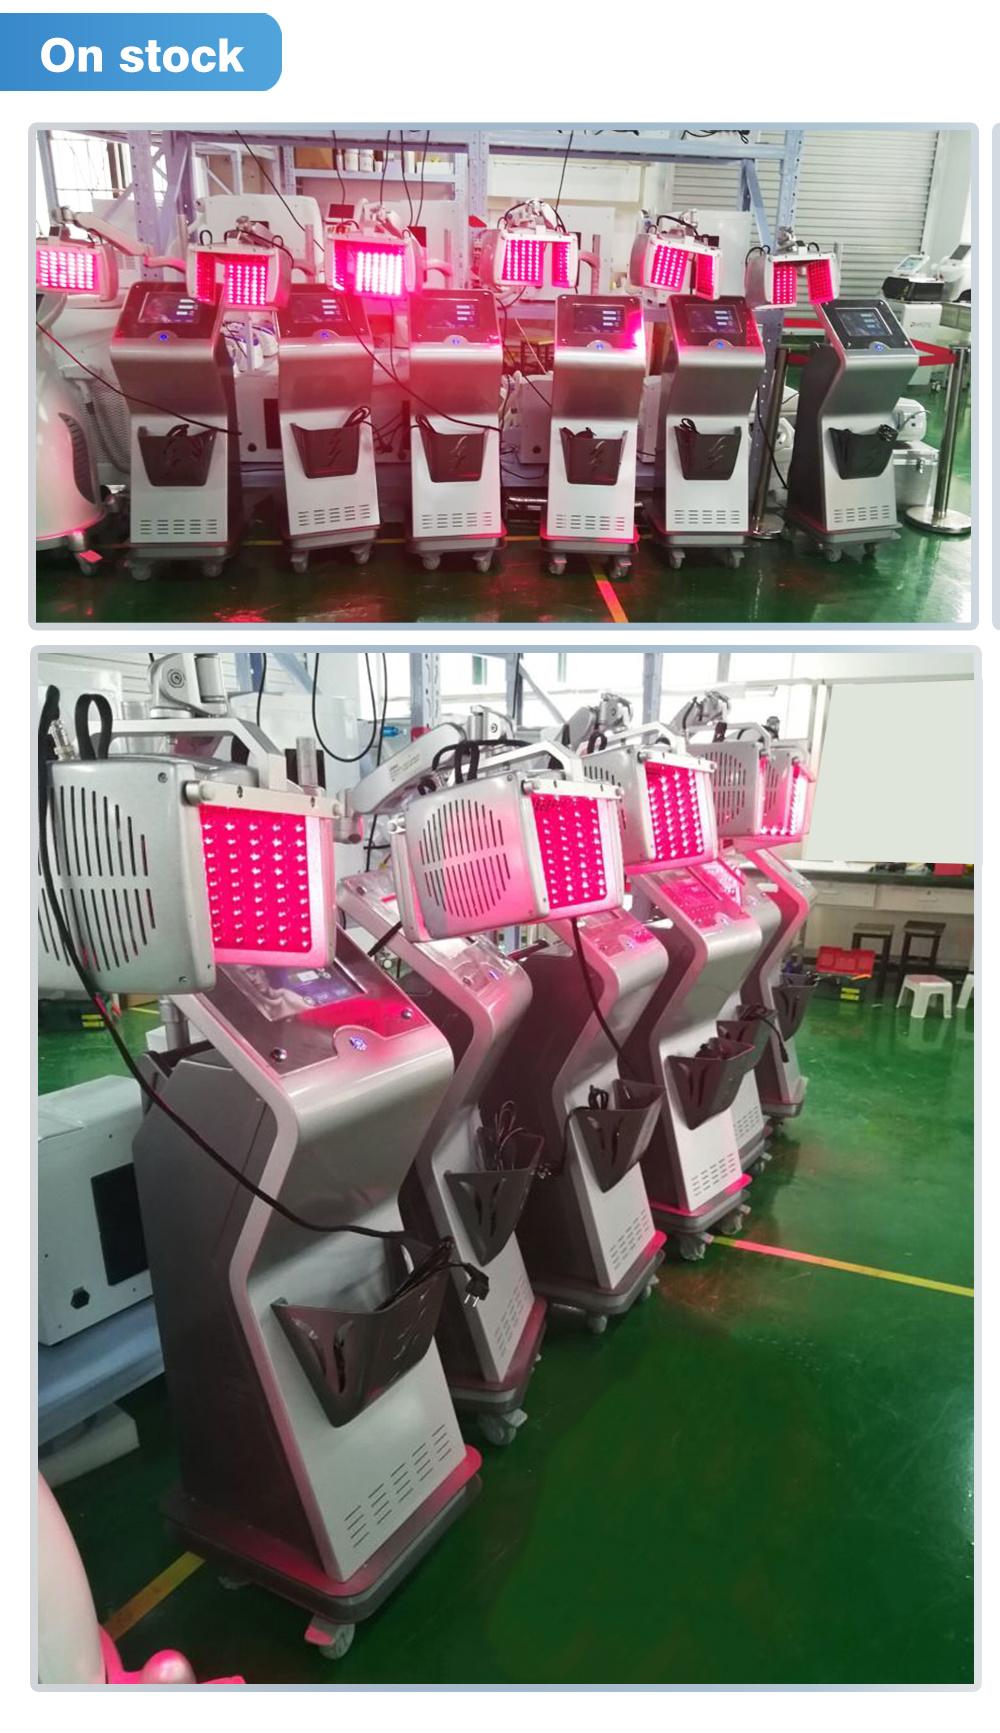 Diode Laser Beauty Equipment of Hair Growth Professional Treatment of Hair Loss and Baldness Factory Price